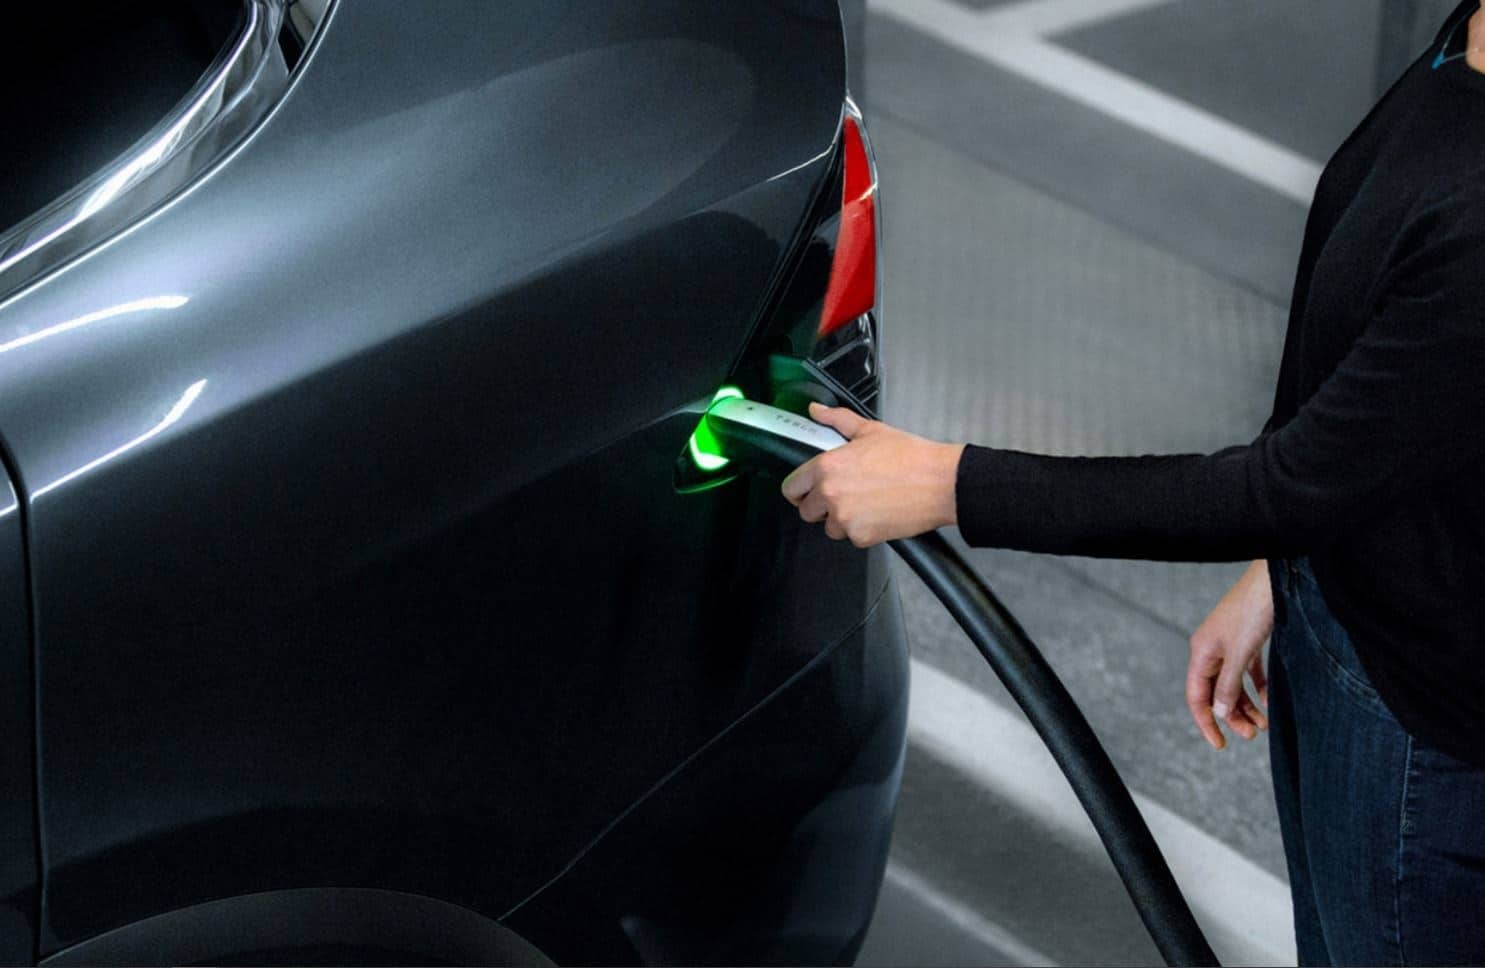 LAZ Parking Announces New Electric Vehicle Charging Program to Install 500 New Charging Stations at Locations Nationwide